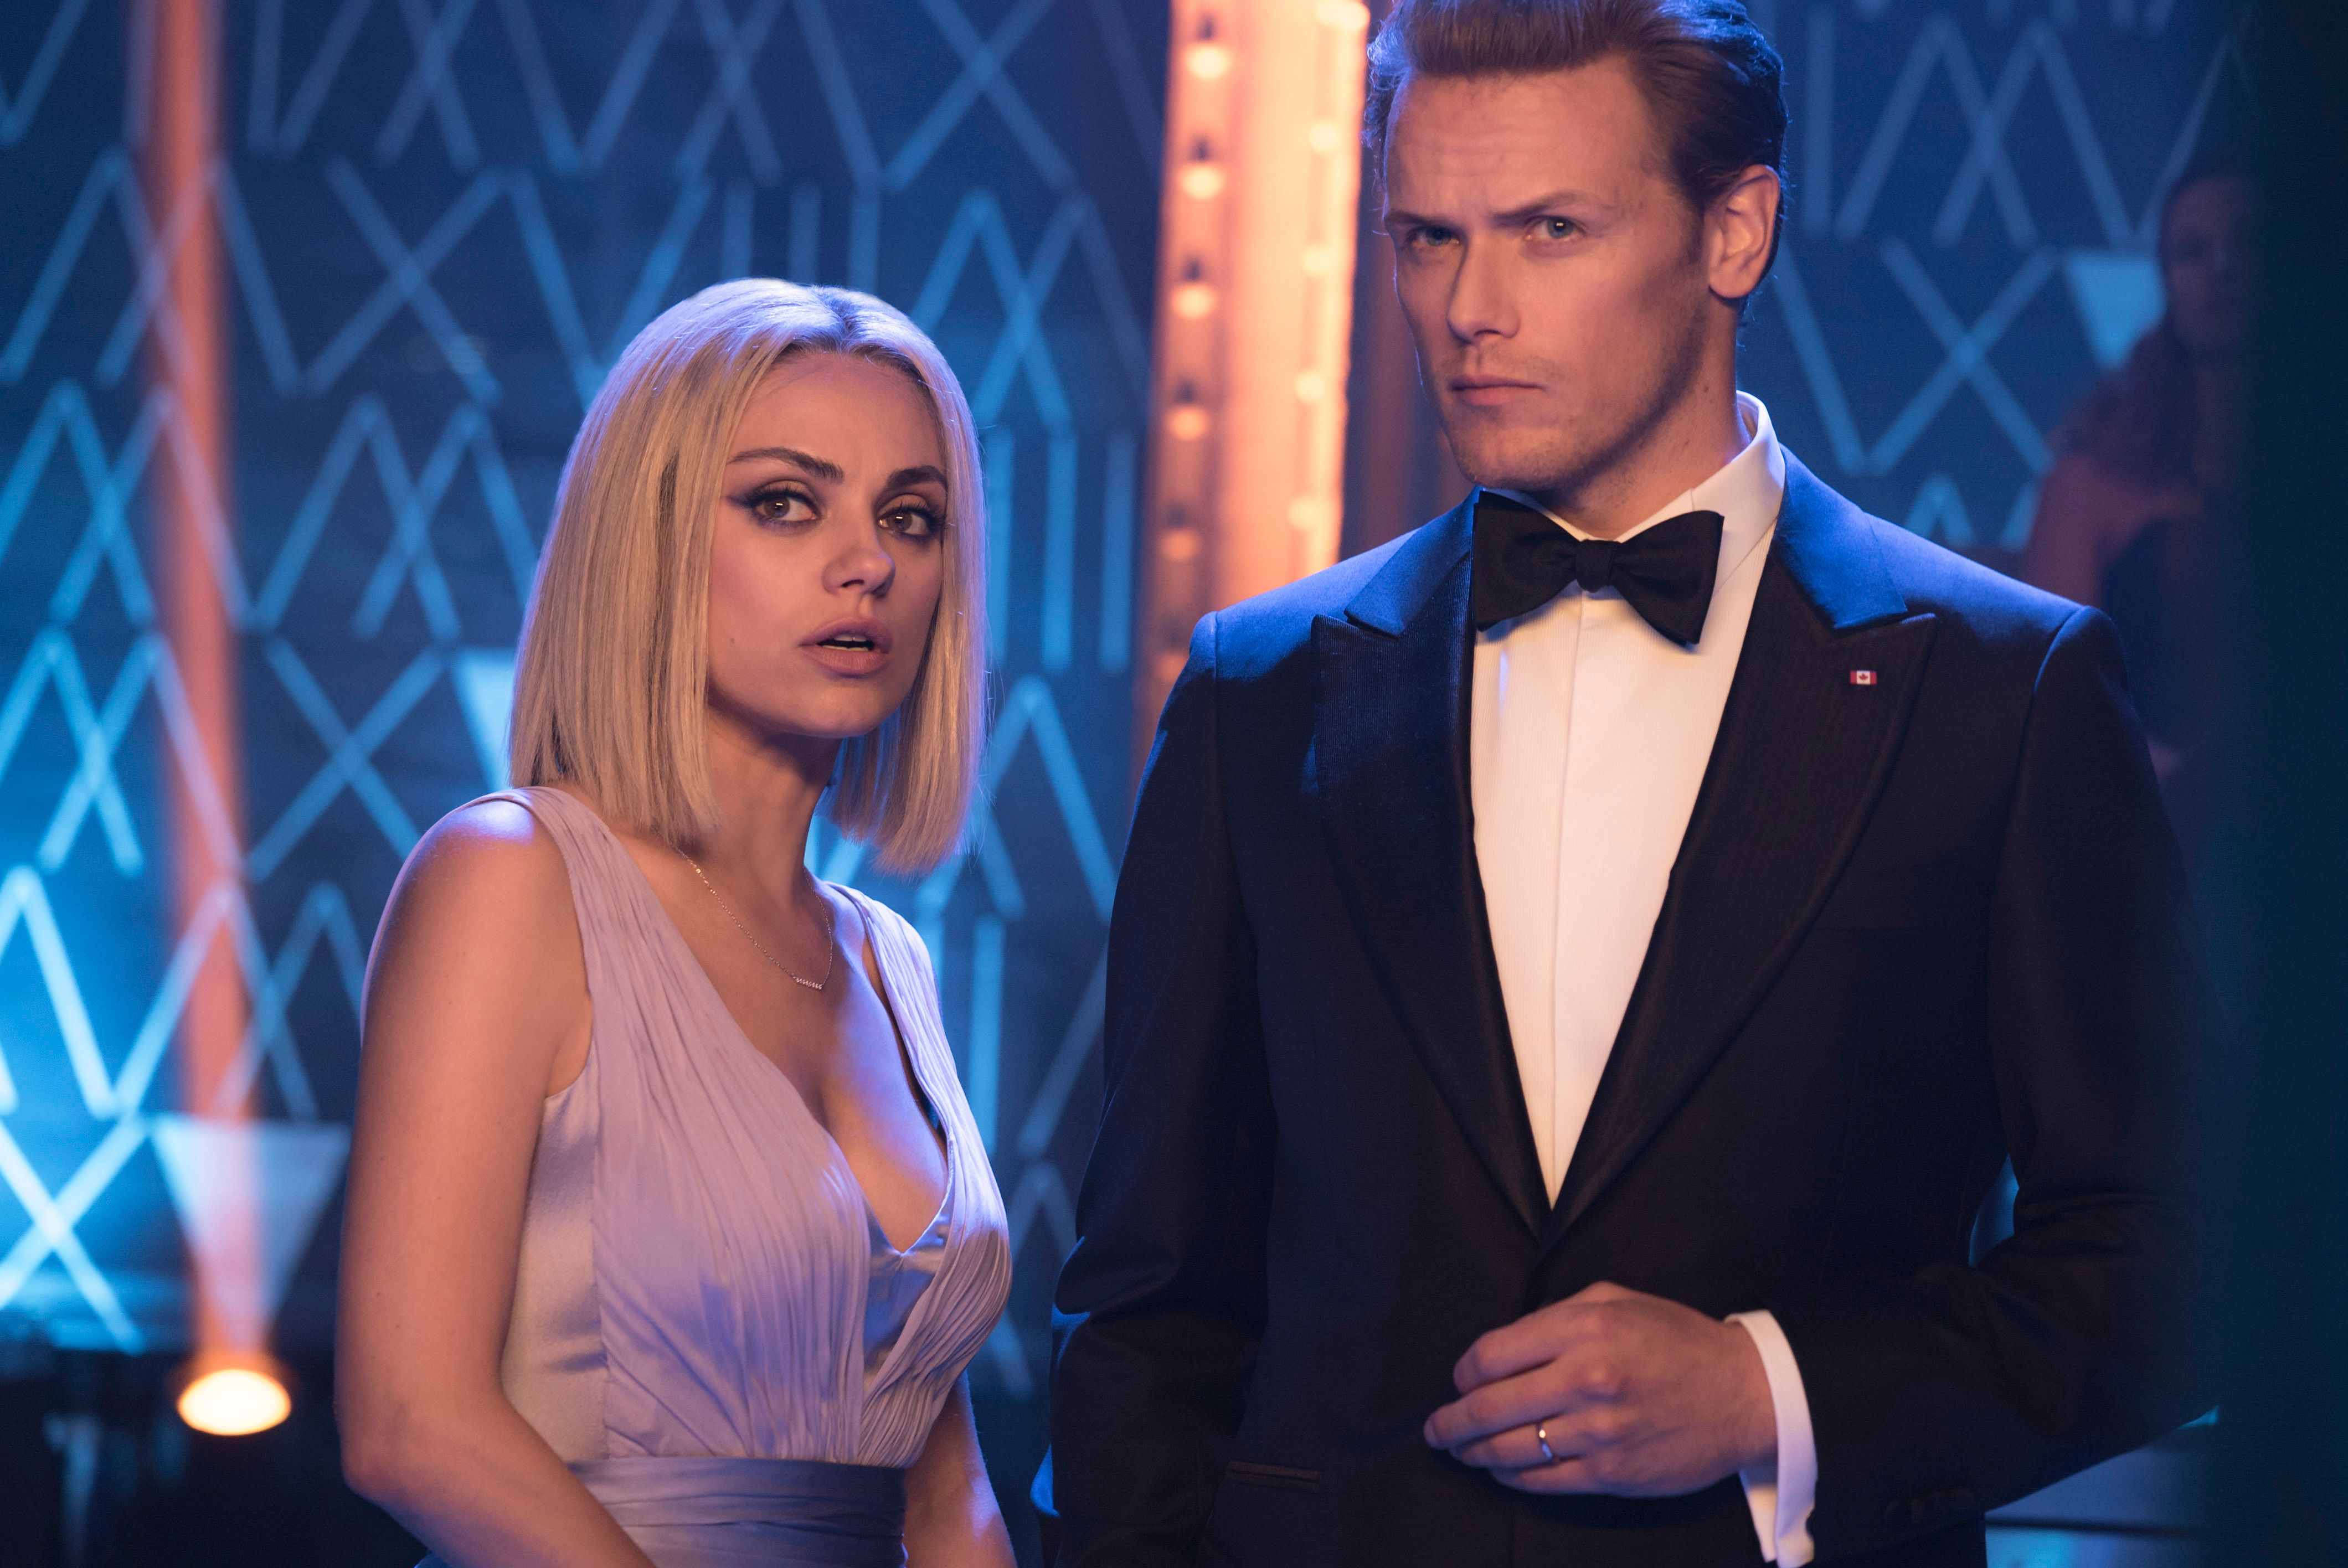 Mila Kunis Is Unrecognizable With New Blonde Hair